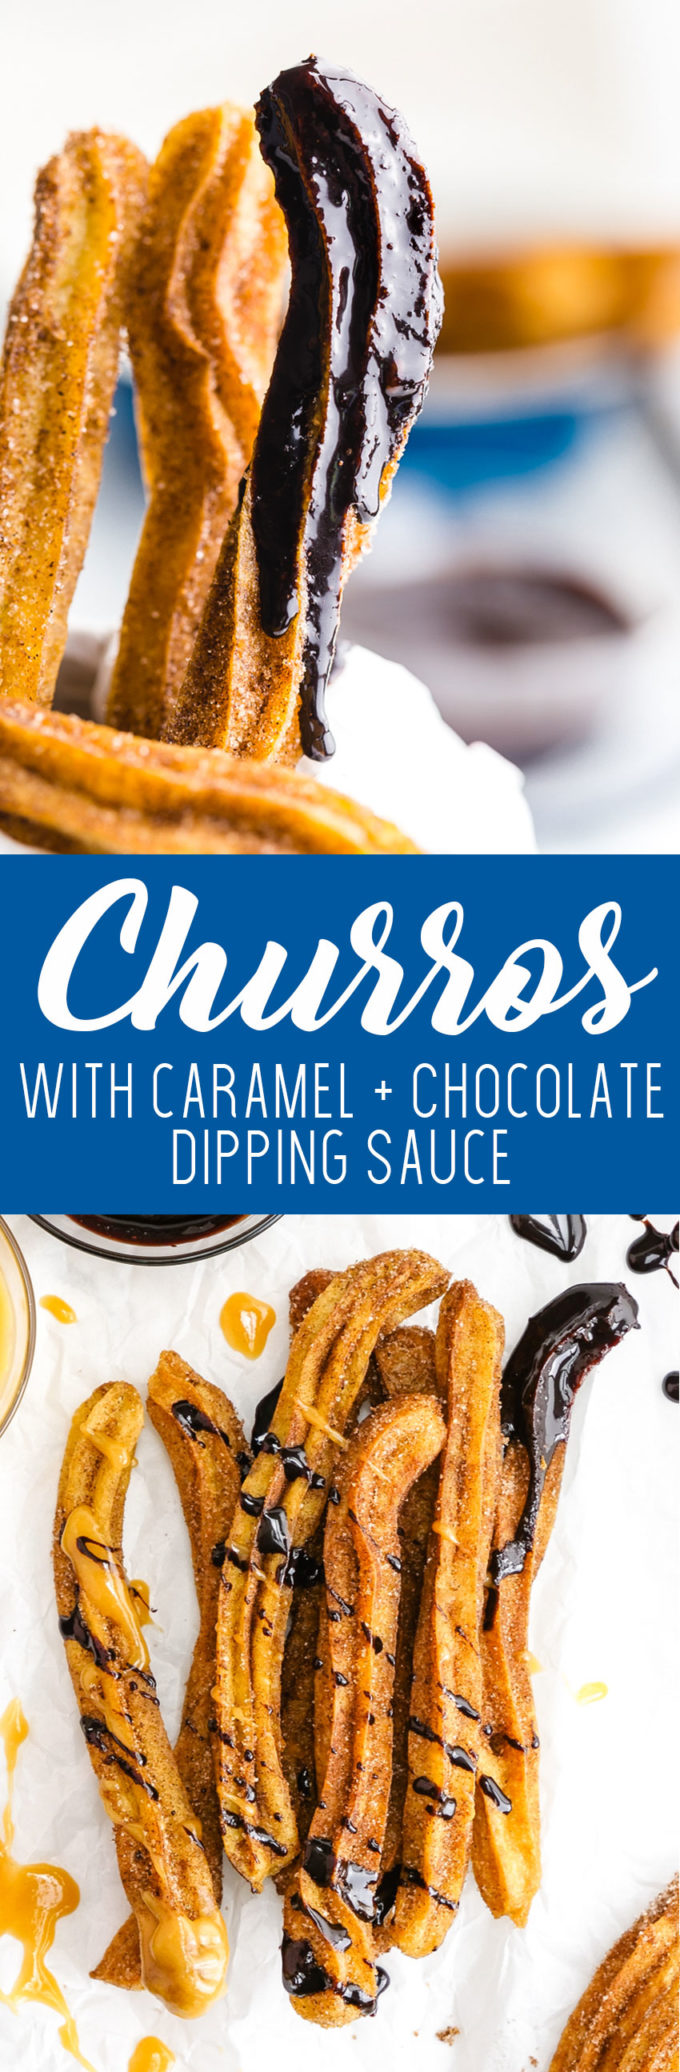 Oh my goodness these are good! And the churro dipping sauces of chocolate and caramel! To die for. These fried churros are so easy to make too. A must make. 